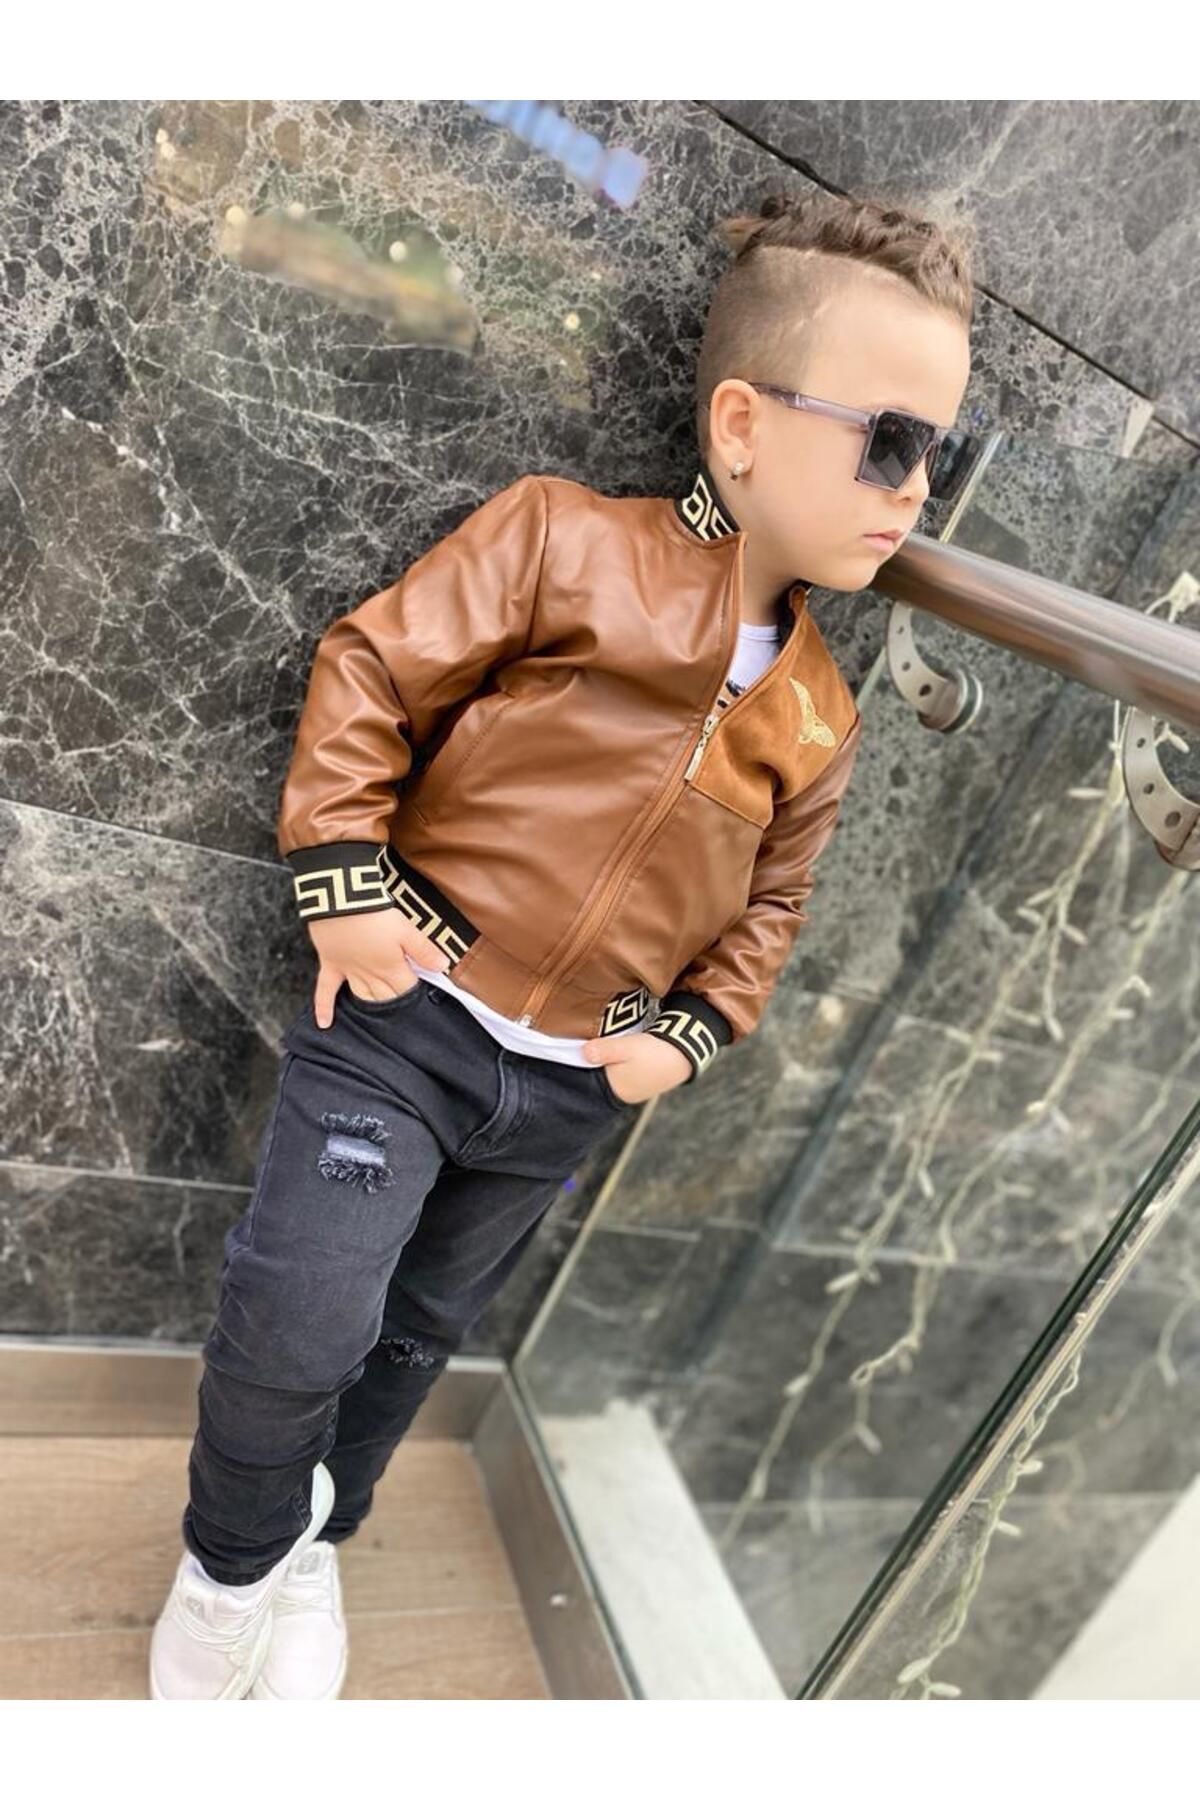 Faux leather boys jacket#kidsstyle#fashionkids#boysjacket#leatherjacket | Boys  leather jacket, Stylish kids, Leather outfit